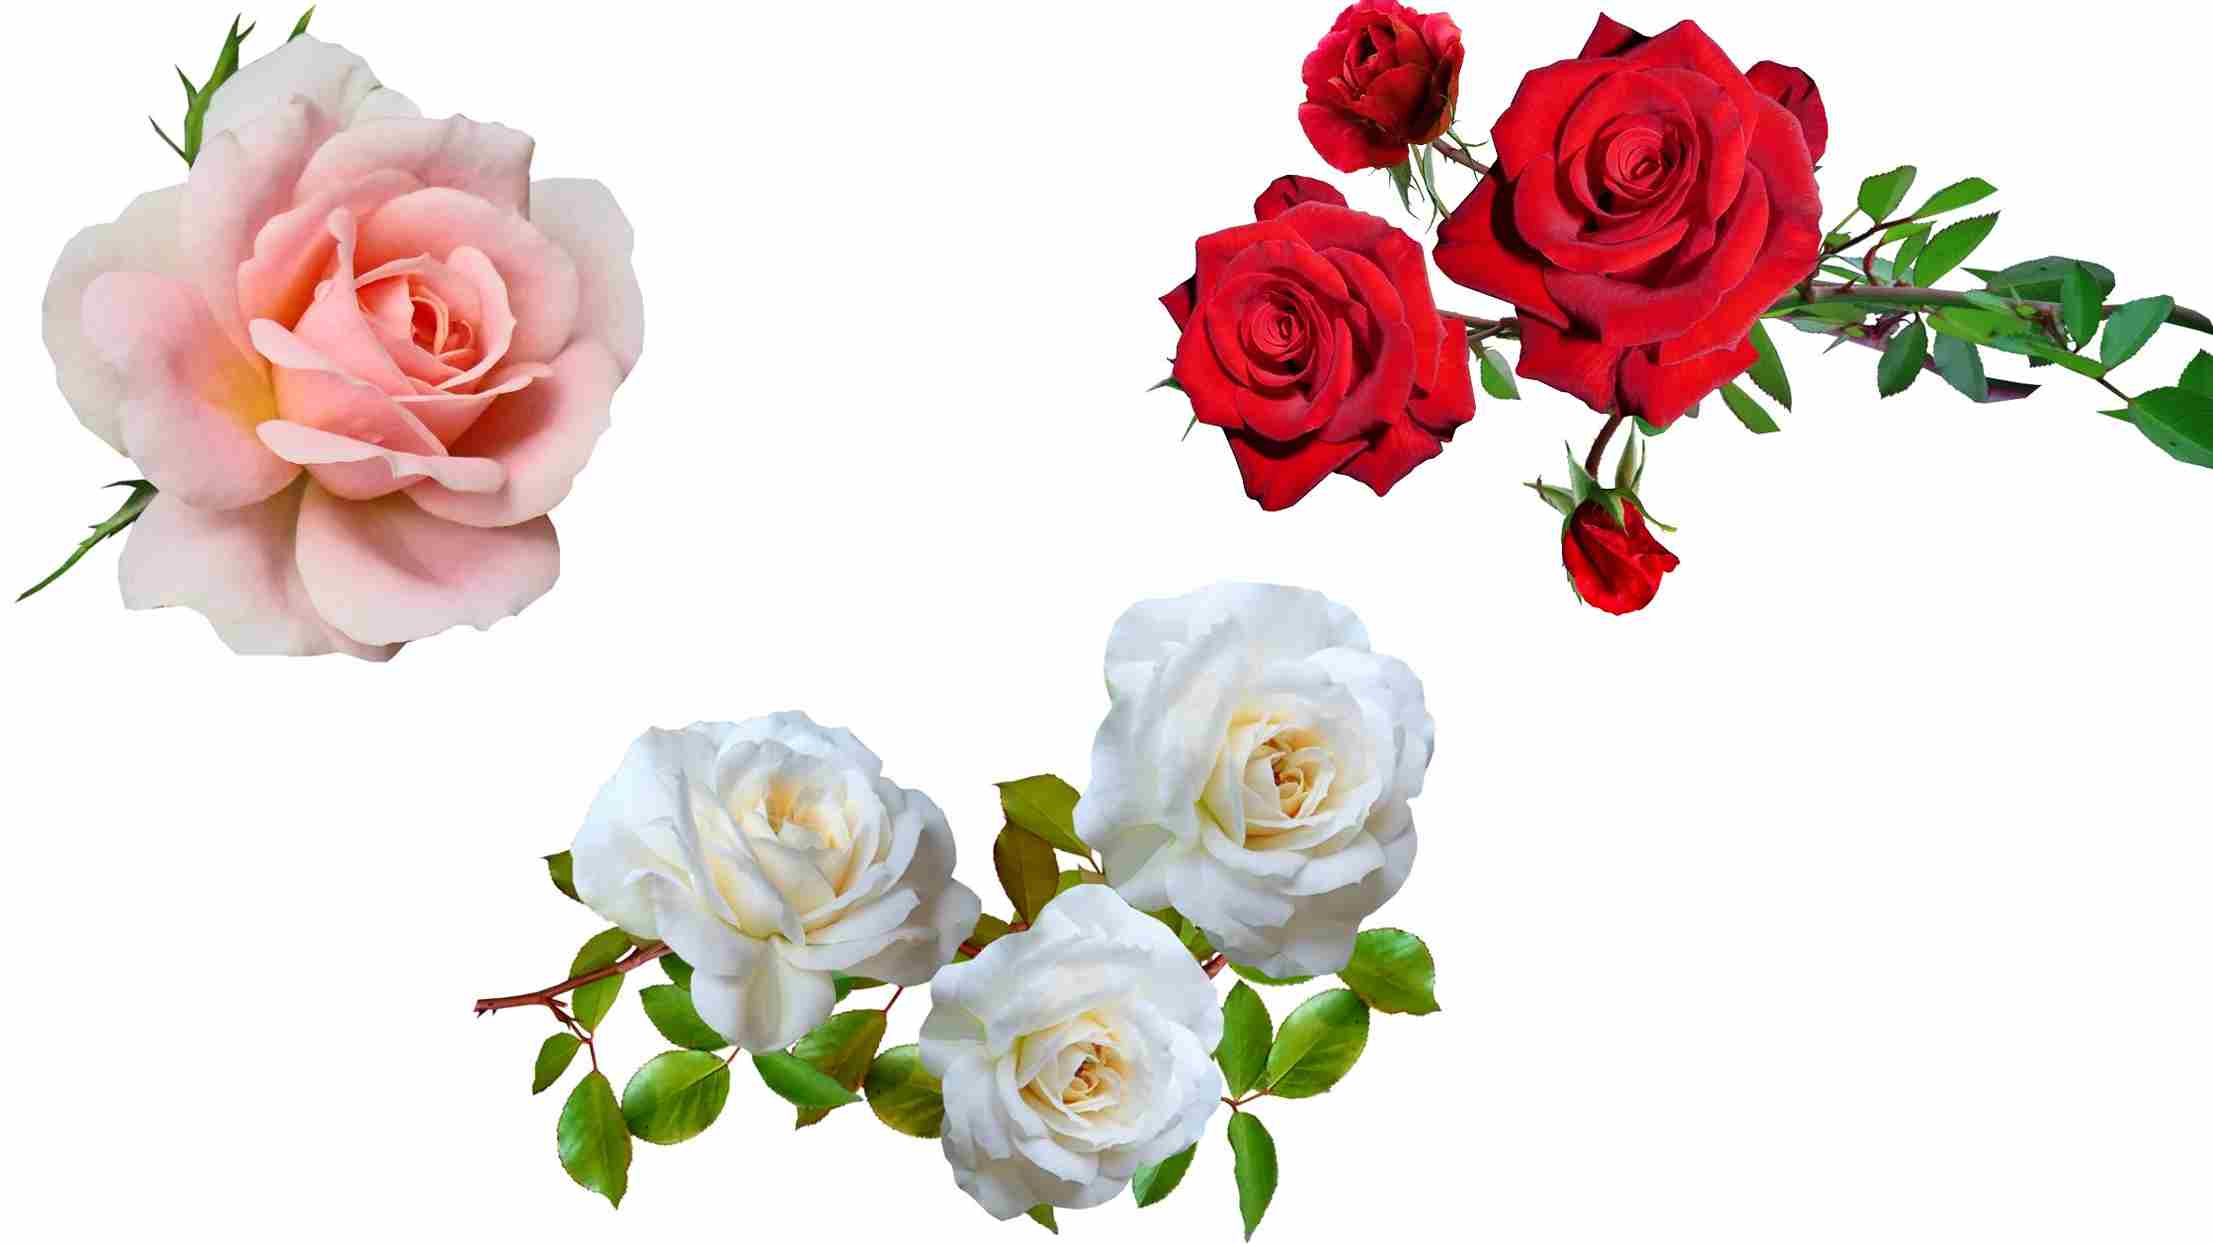 Smell of Roses Spiritual Meaning